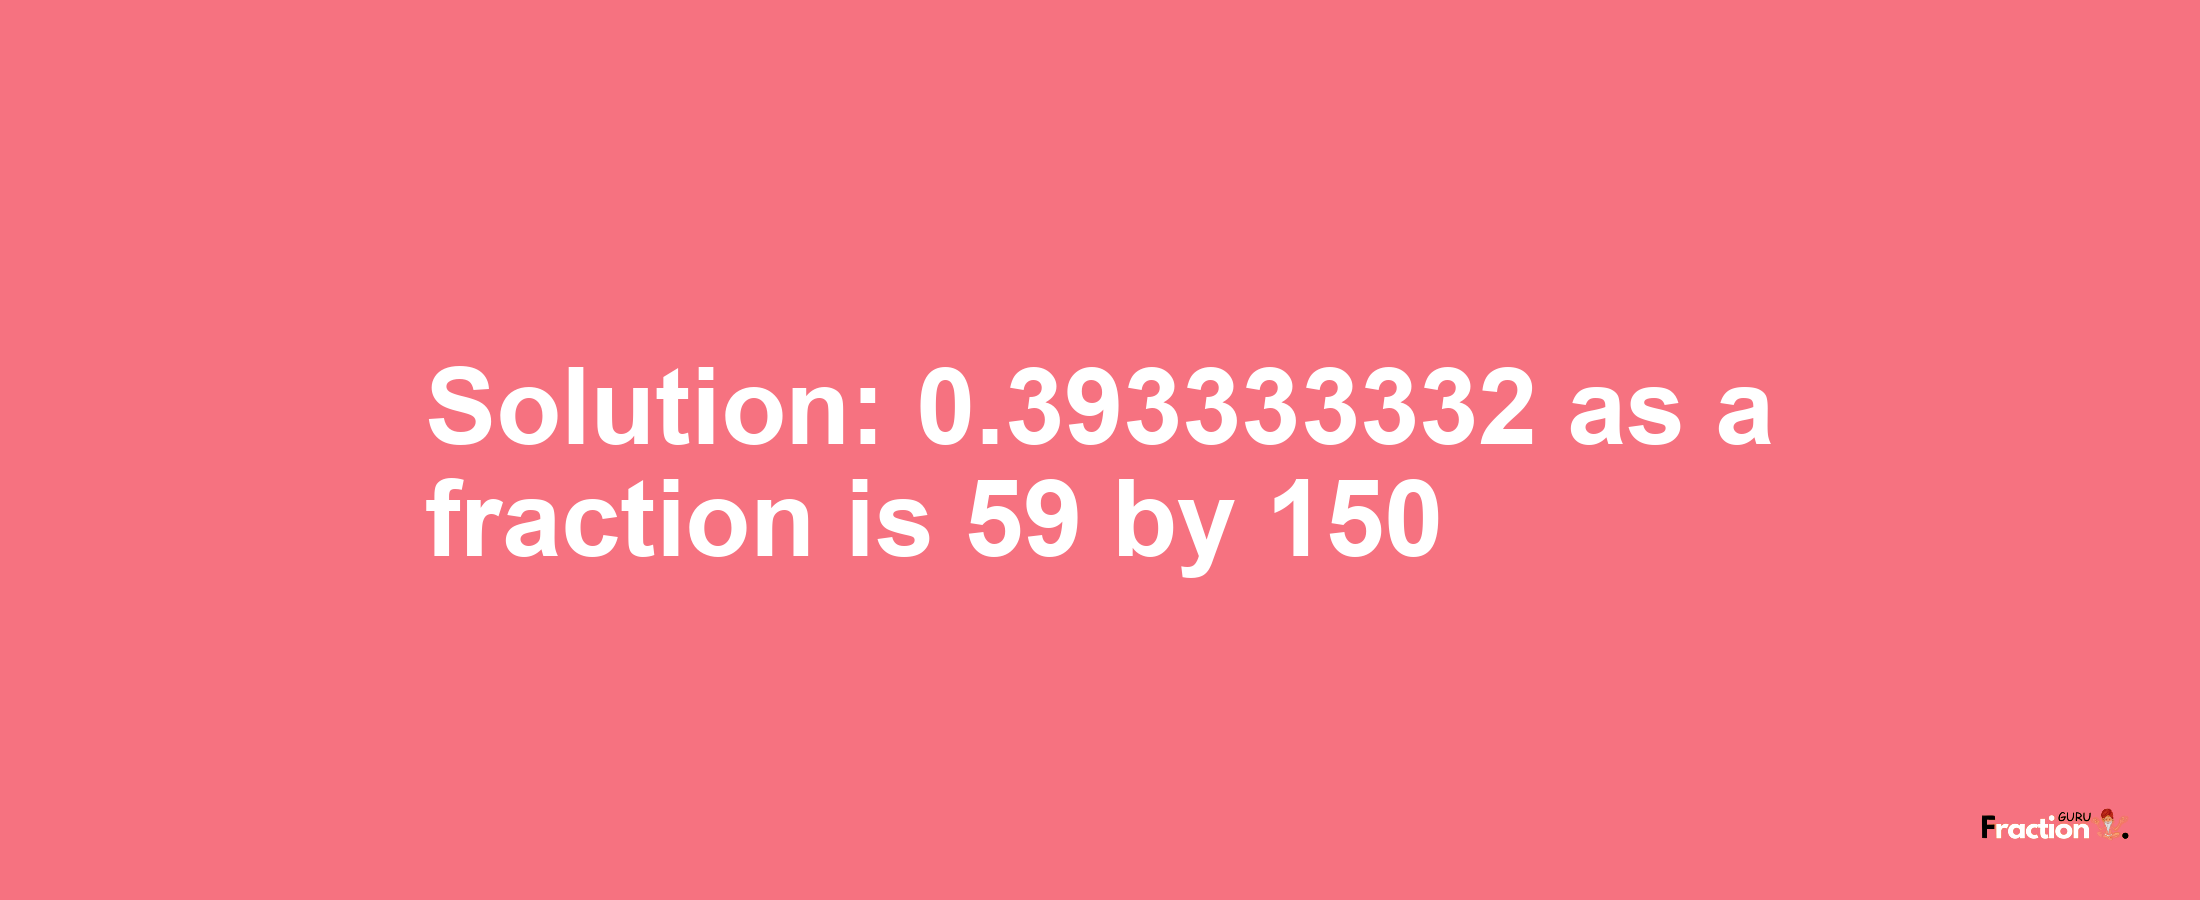 Solution:0.393333332 as a fraction is 59/150